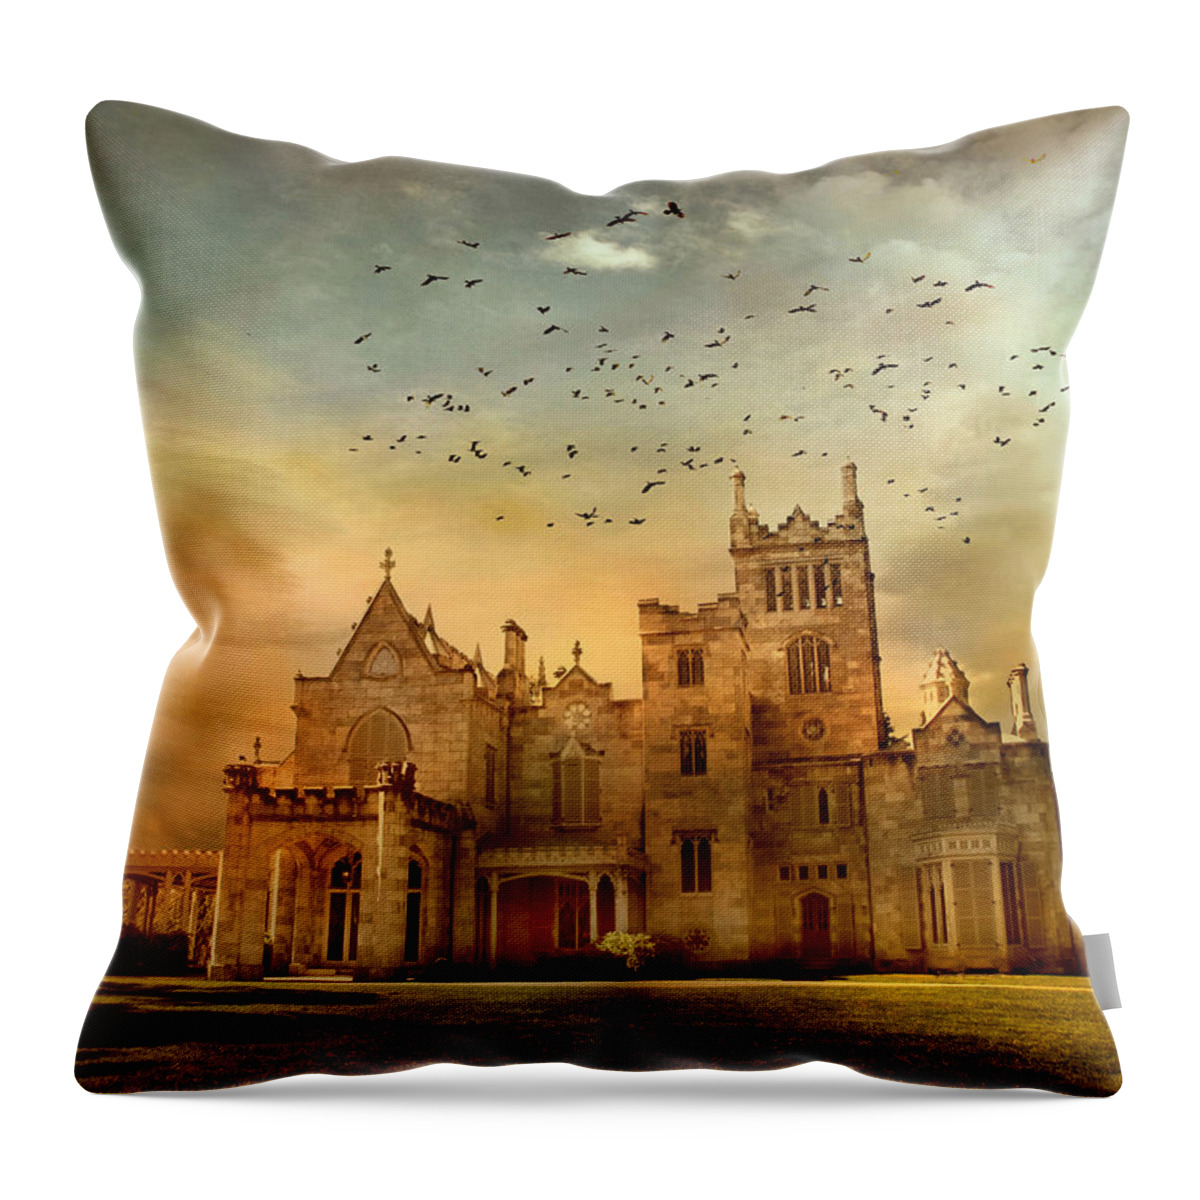 Estate Throw Pillow featuring the photograph Lyndhurst Estate by Jessica Jenney